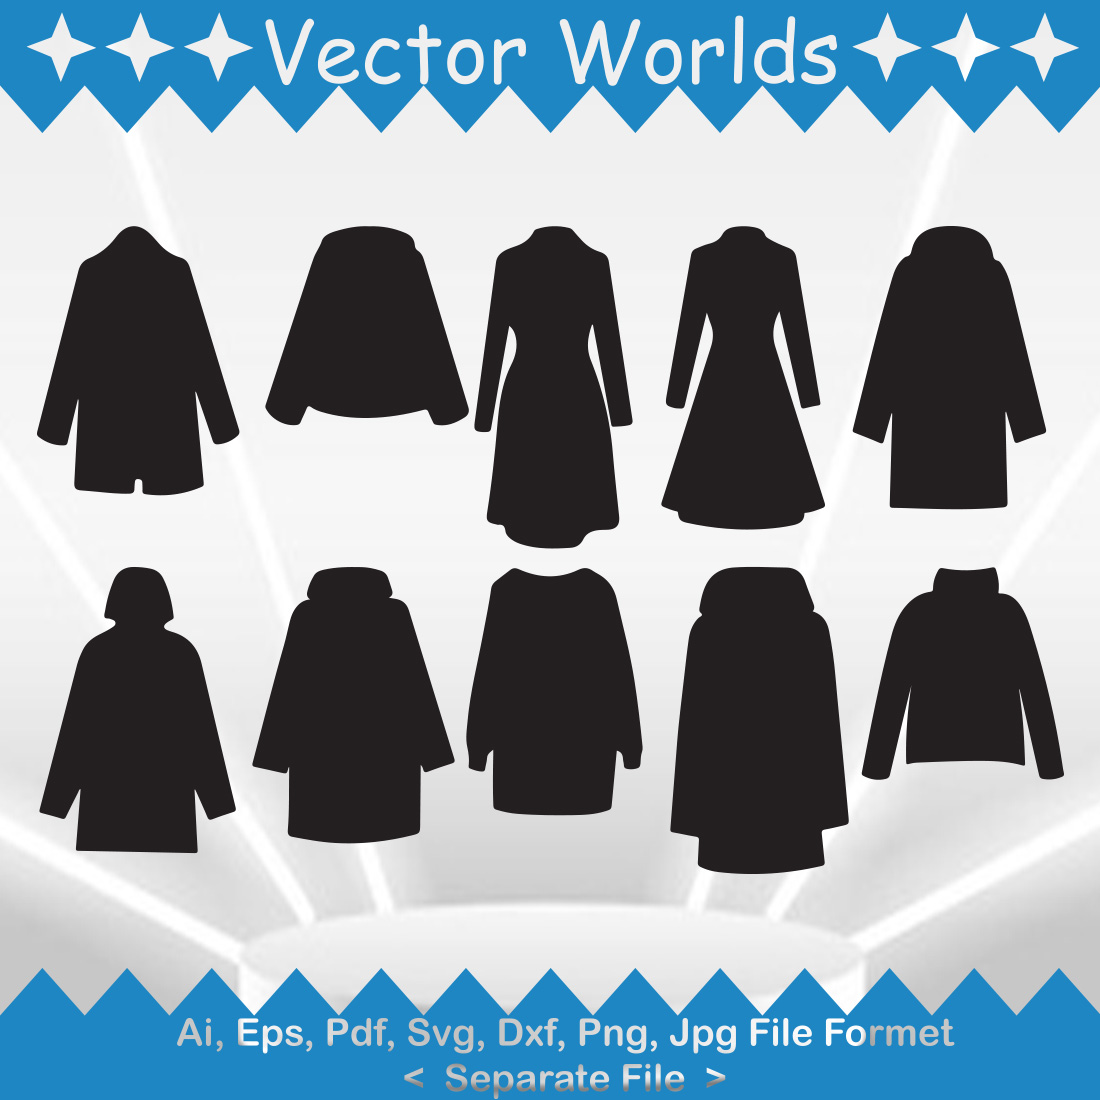 Bundle of vector beautiful images of winter coat silhouettes.